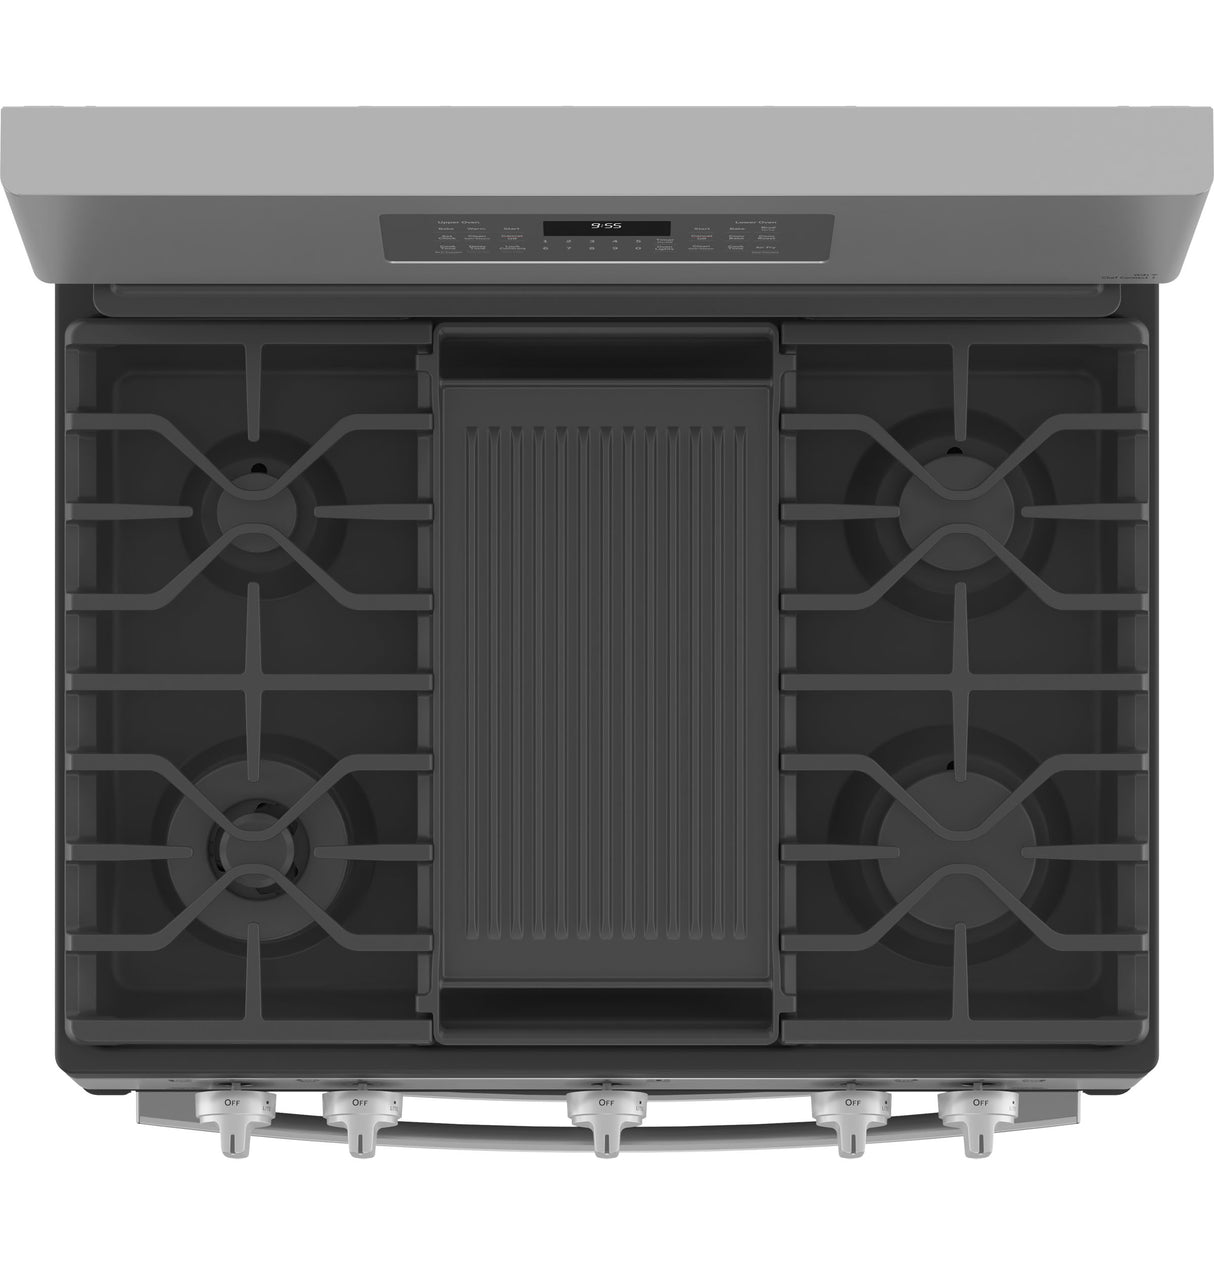 GE Profile(TM) 30" Free-Standing Gas Double Oven Convection Fingerprint Resistant Range with No Preheat Air Fry - (PGB965YPFS)